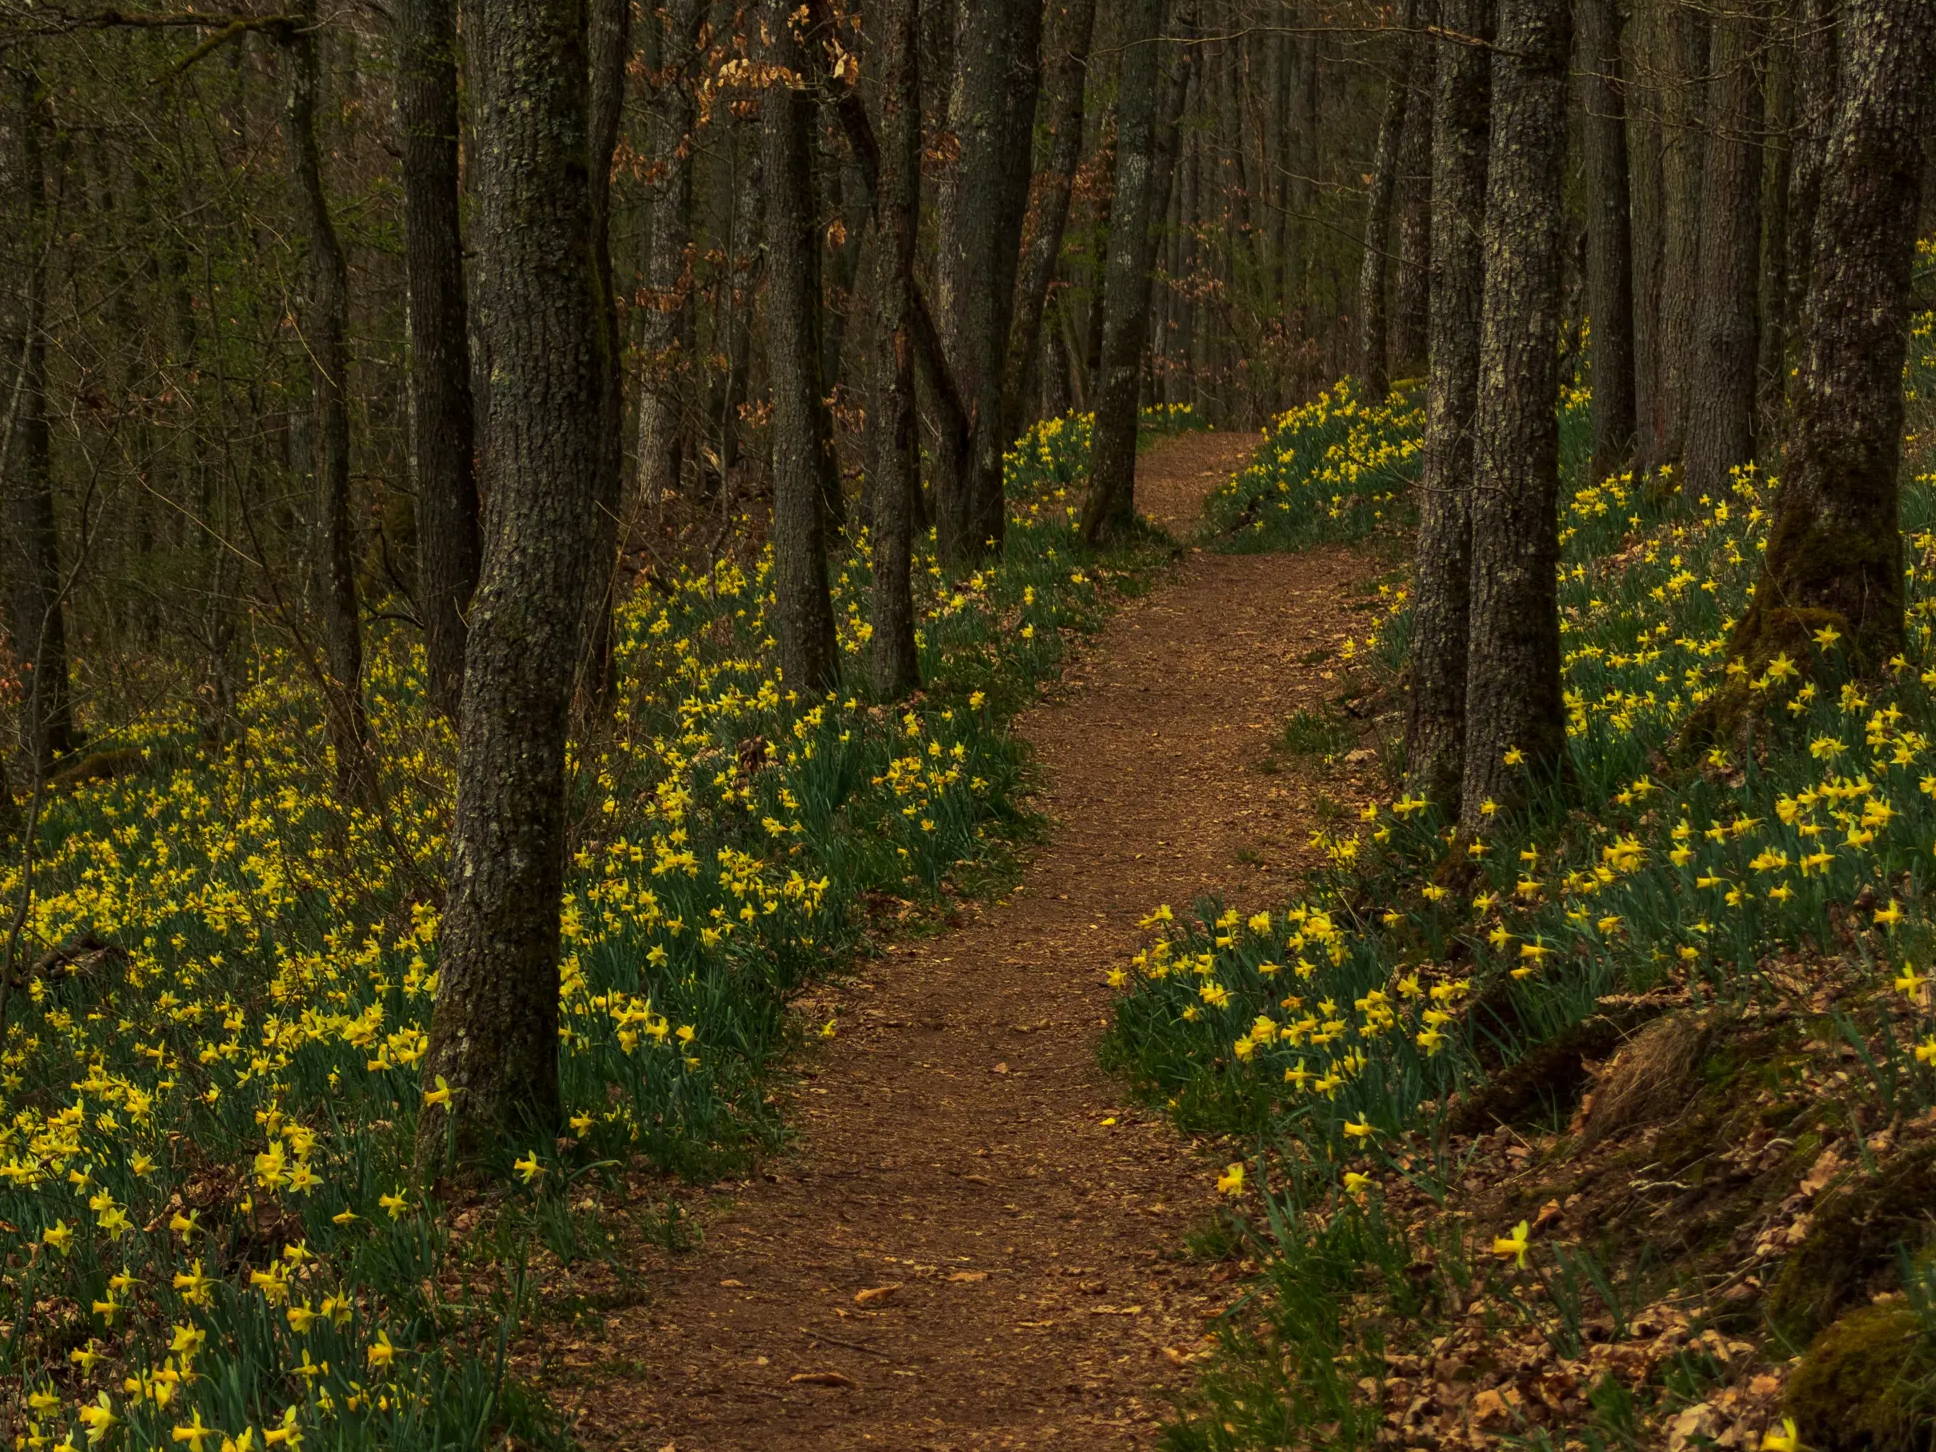 A forest path lined with daffodils